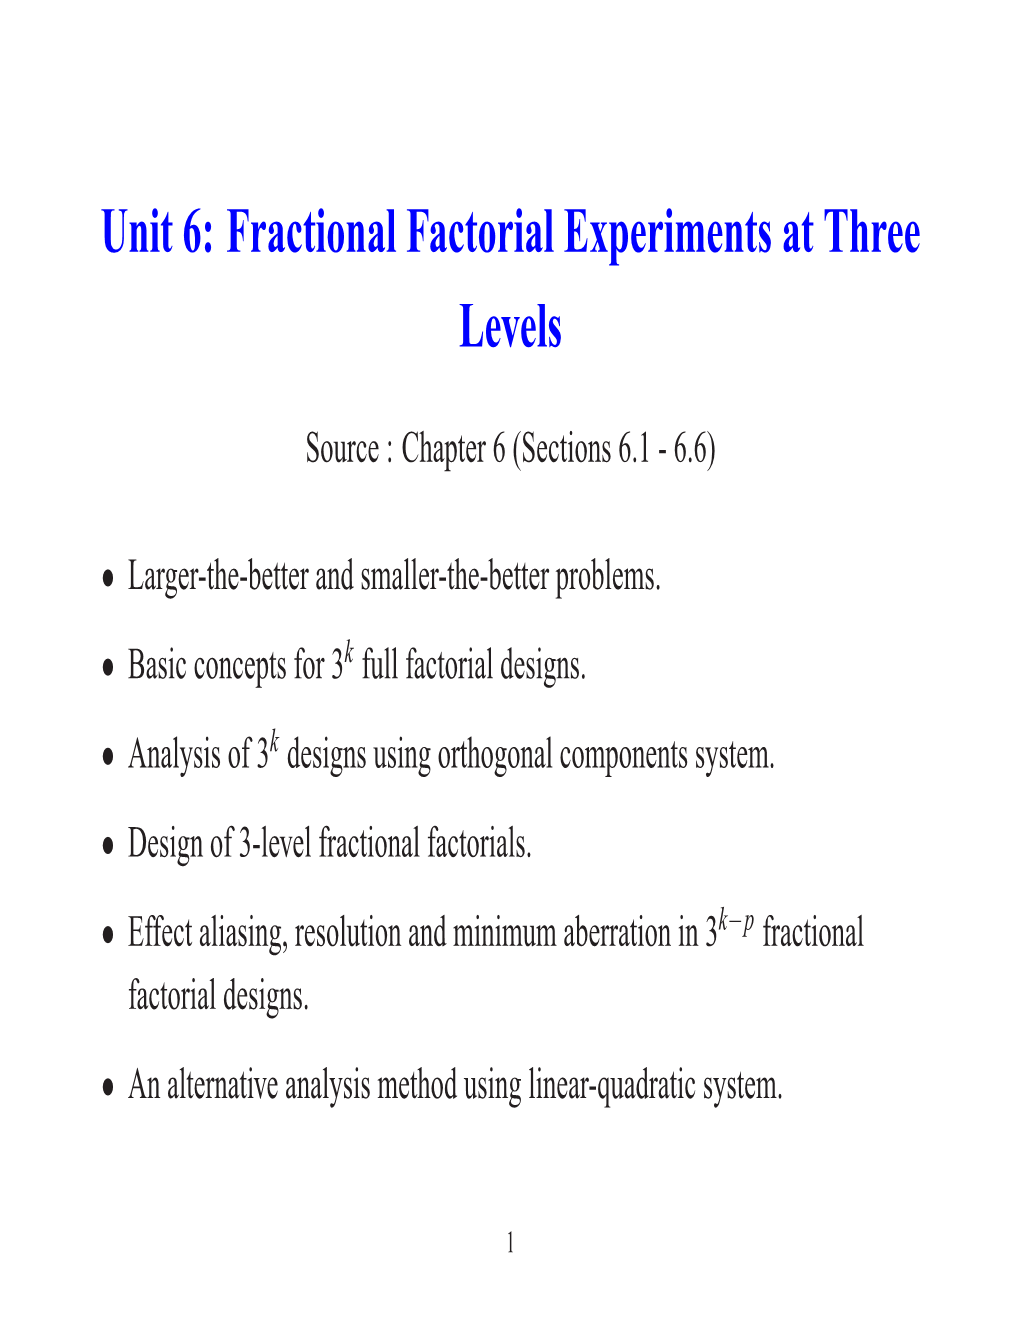 Unit 6: Fractional Factorial Experiments at Three Levels